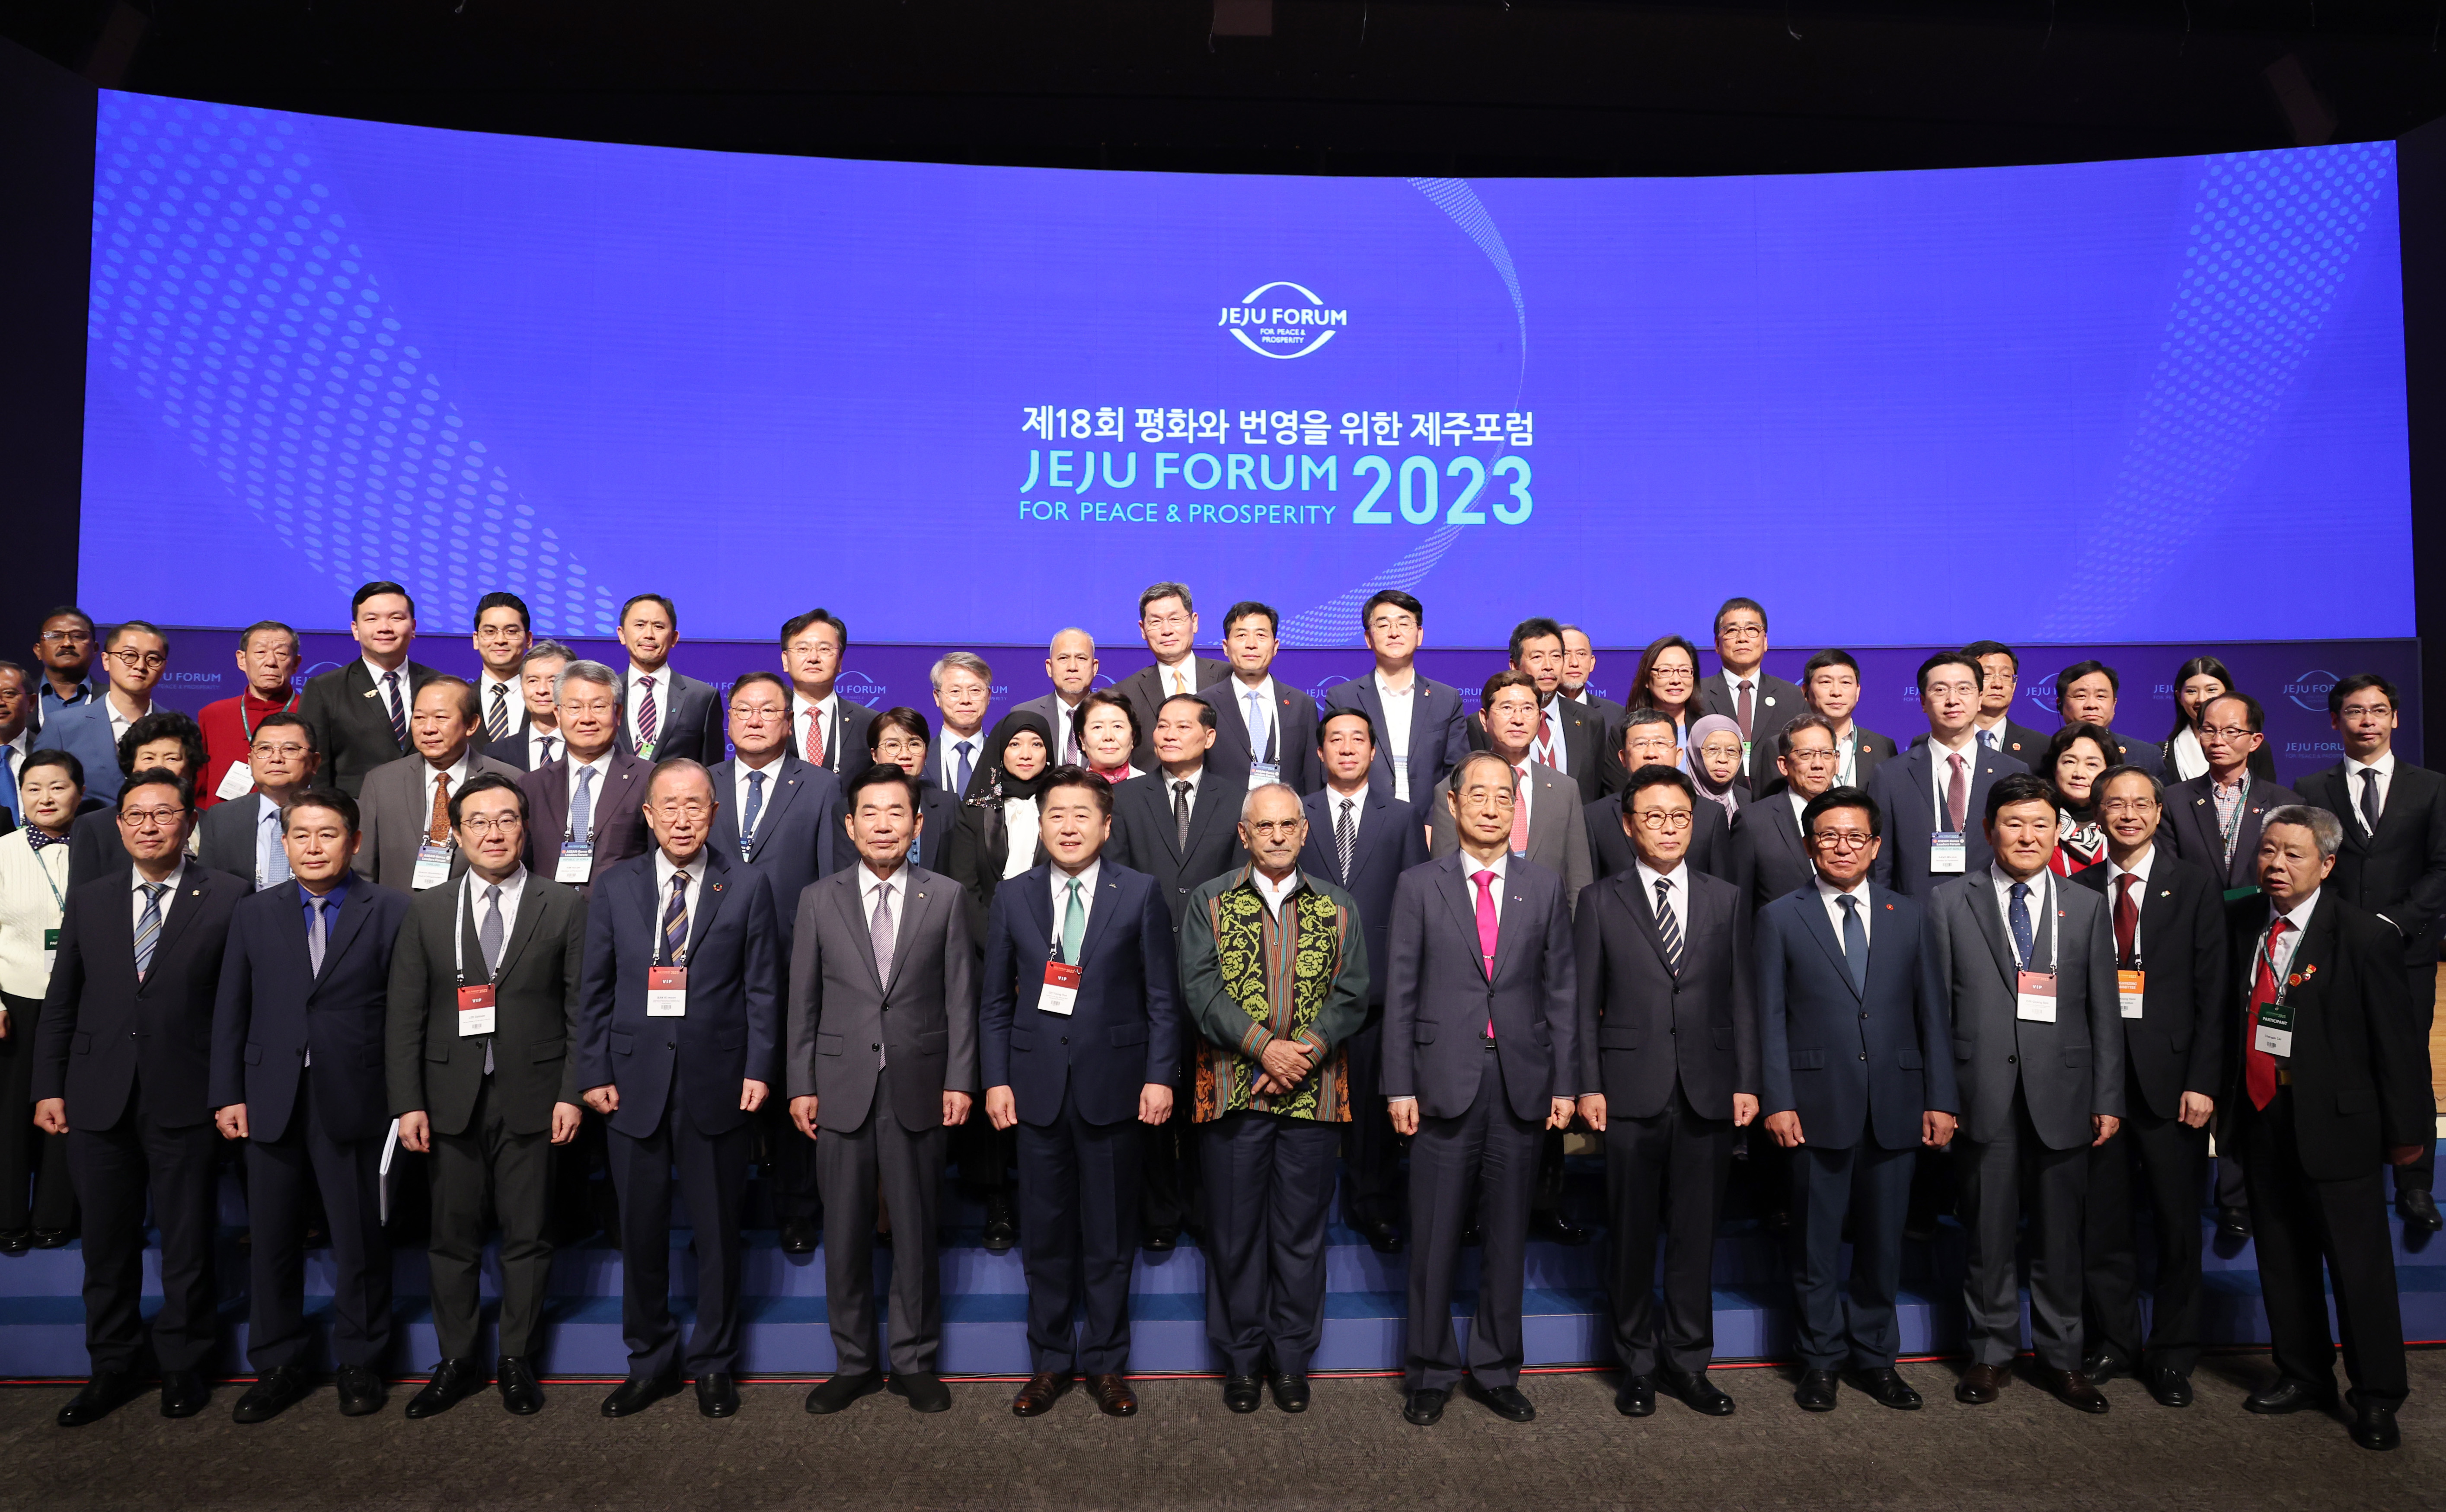 Speaker attends Jeju Forum 2023, presides over luncheon (2) 관련사진 2 보기